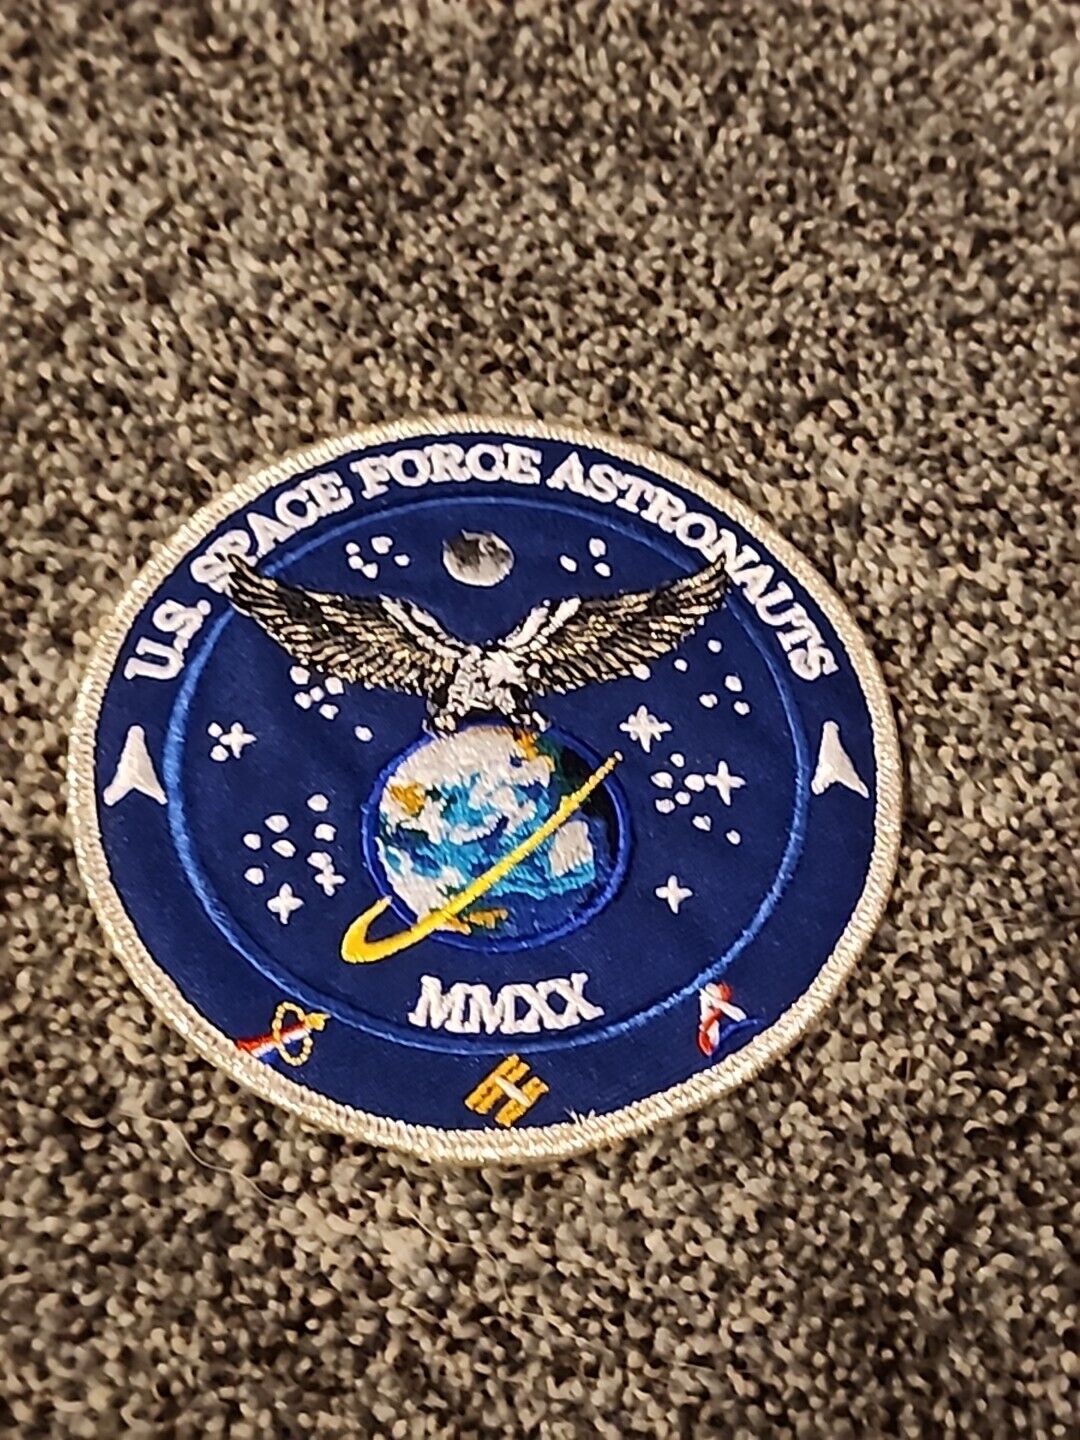 Authentic US SPACE FORCE ASTRONAUTS TIM GAGNON NASA SPACEX USAF USSF 4.5